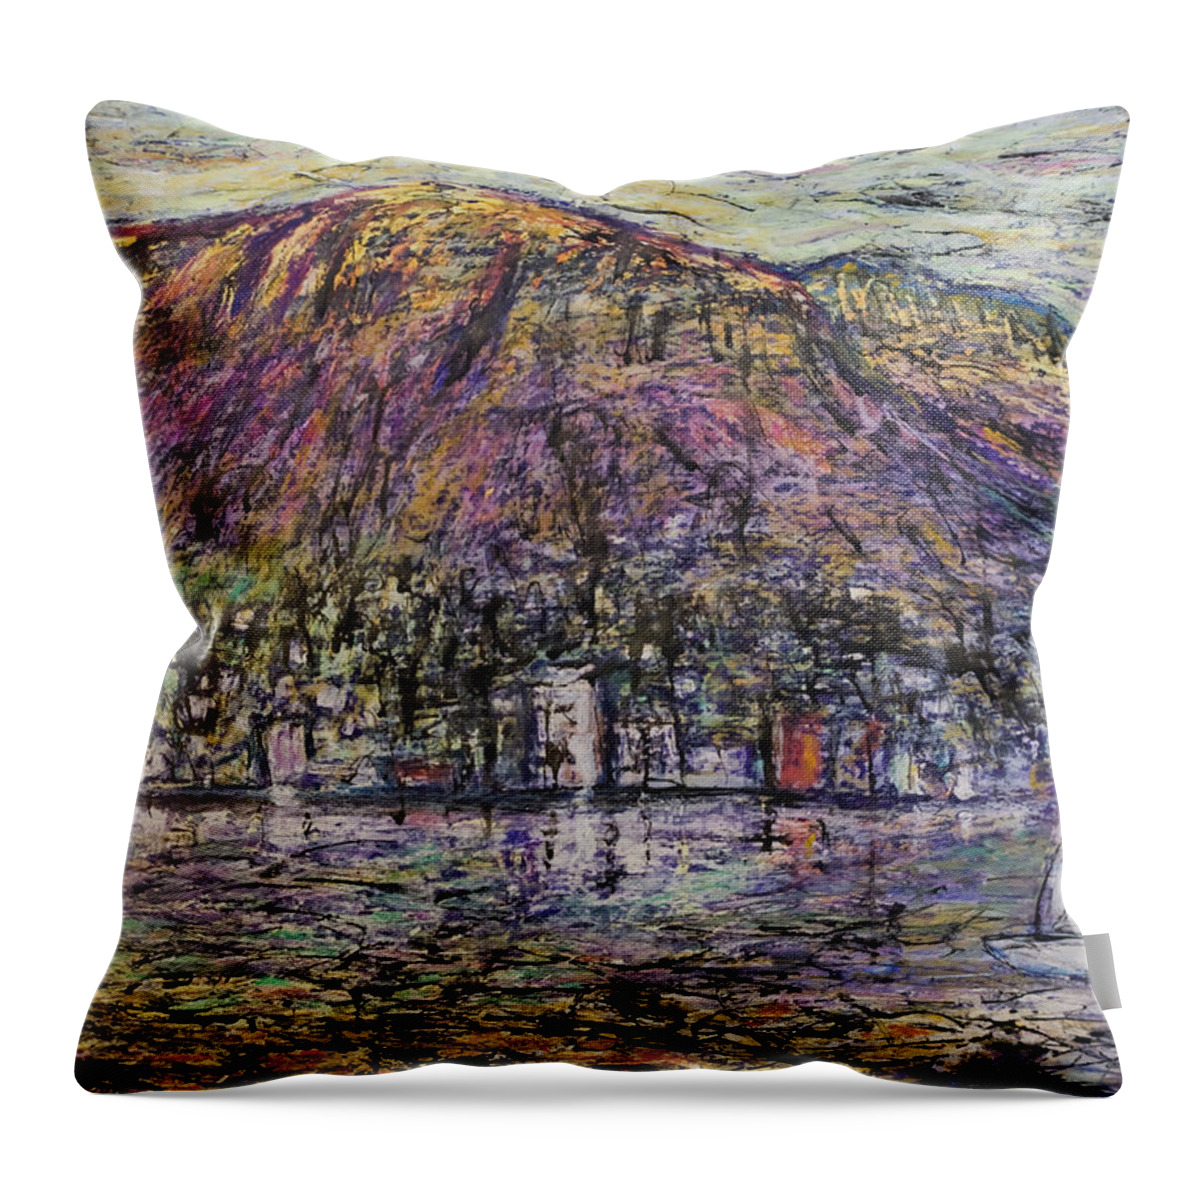 Hobart Tasmania Mount Wellington Sailing Seascape Art; Australia; Boat; Colours; Earth; Hobart; Jeremy Holton; Landscape; Mount Wellington; Mountain; Mt Wellington; Painting; Places; River; Sailing; Sea; Subject; Tasmania; Violet; Water; Www.jeremyholton.com; Yacht Throw Pillow featuring the painting Sundays in Hobart by Jeremy Holton